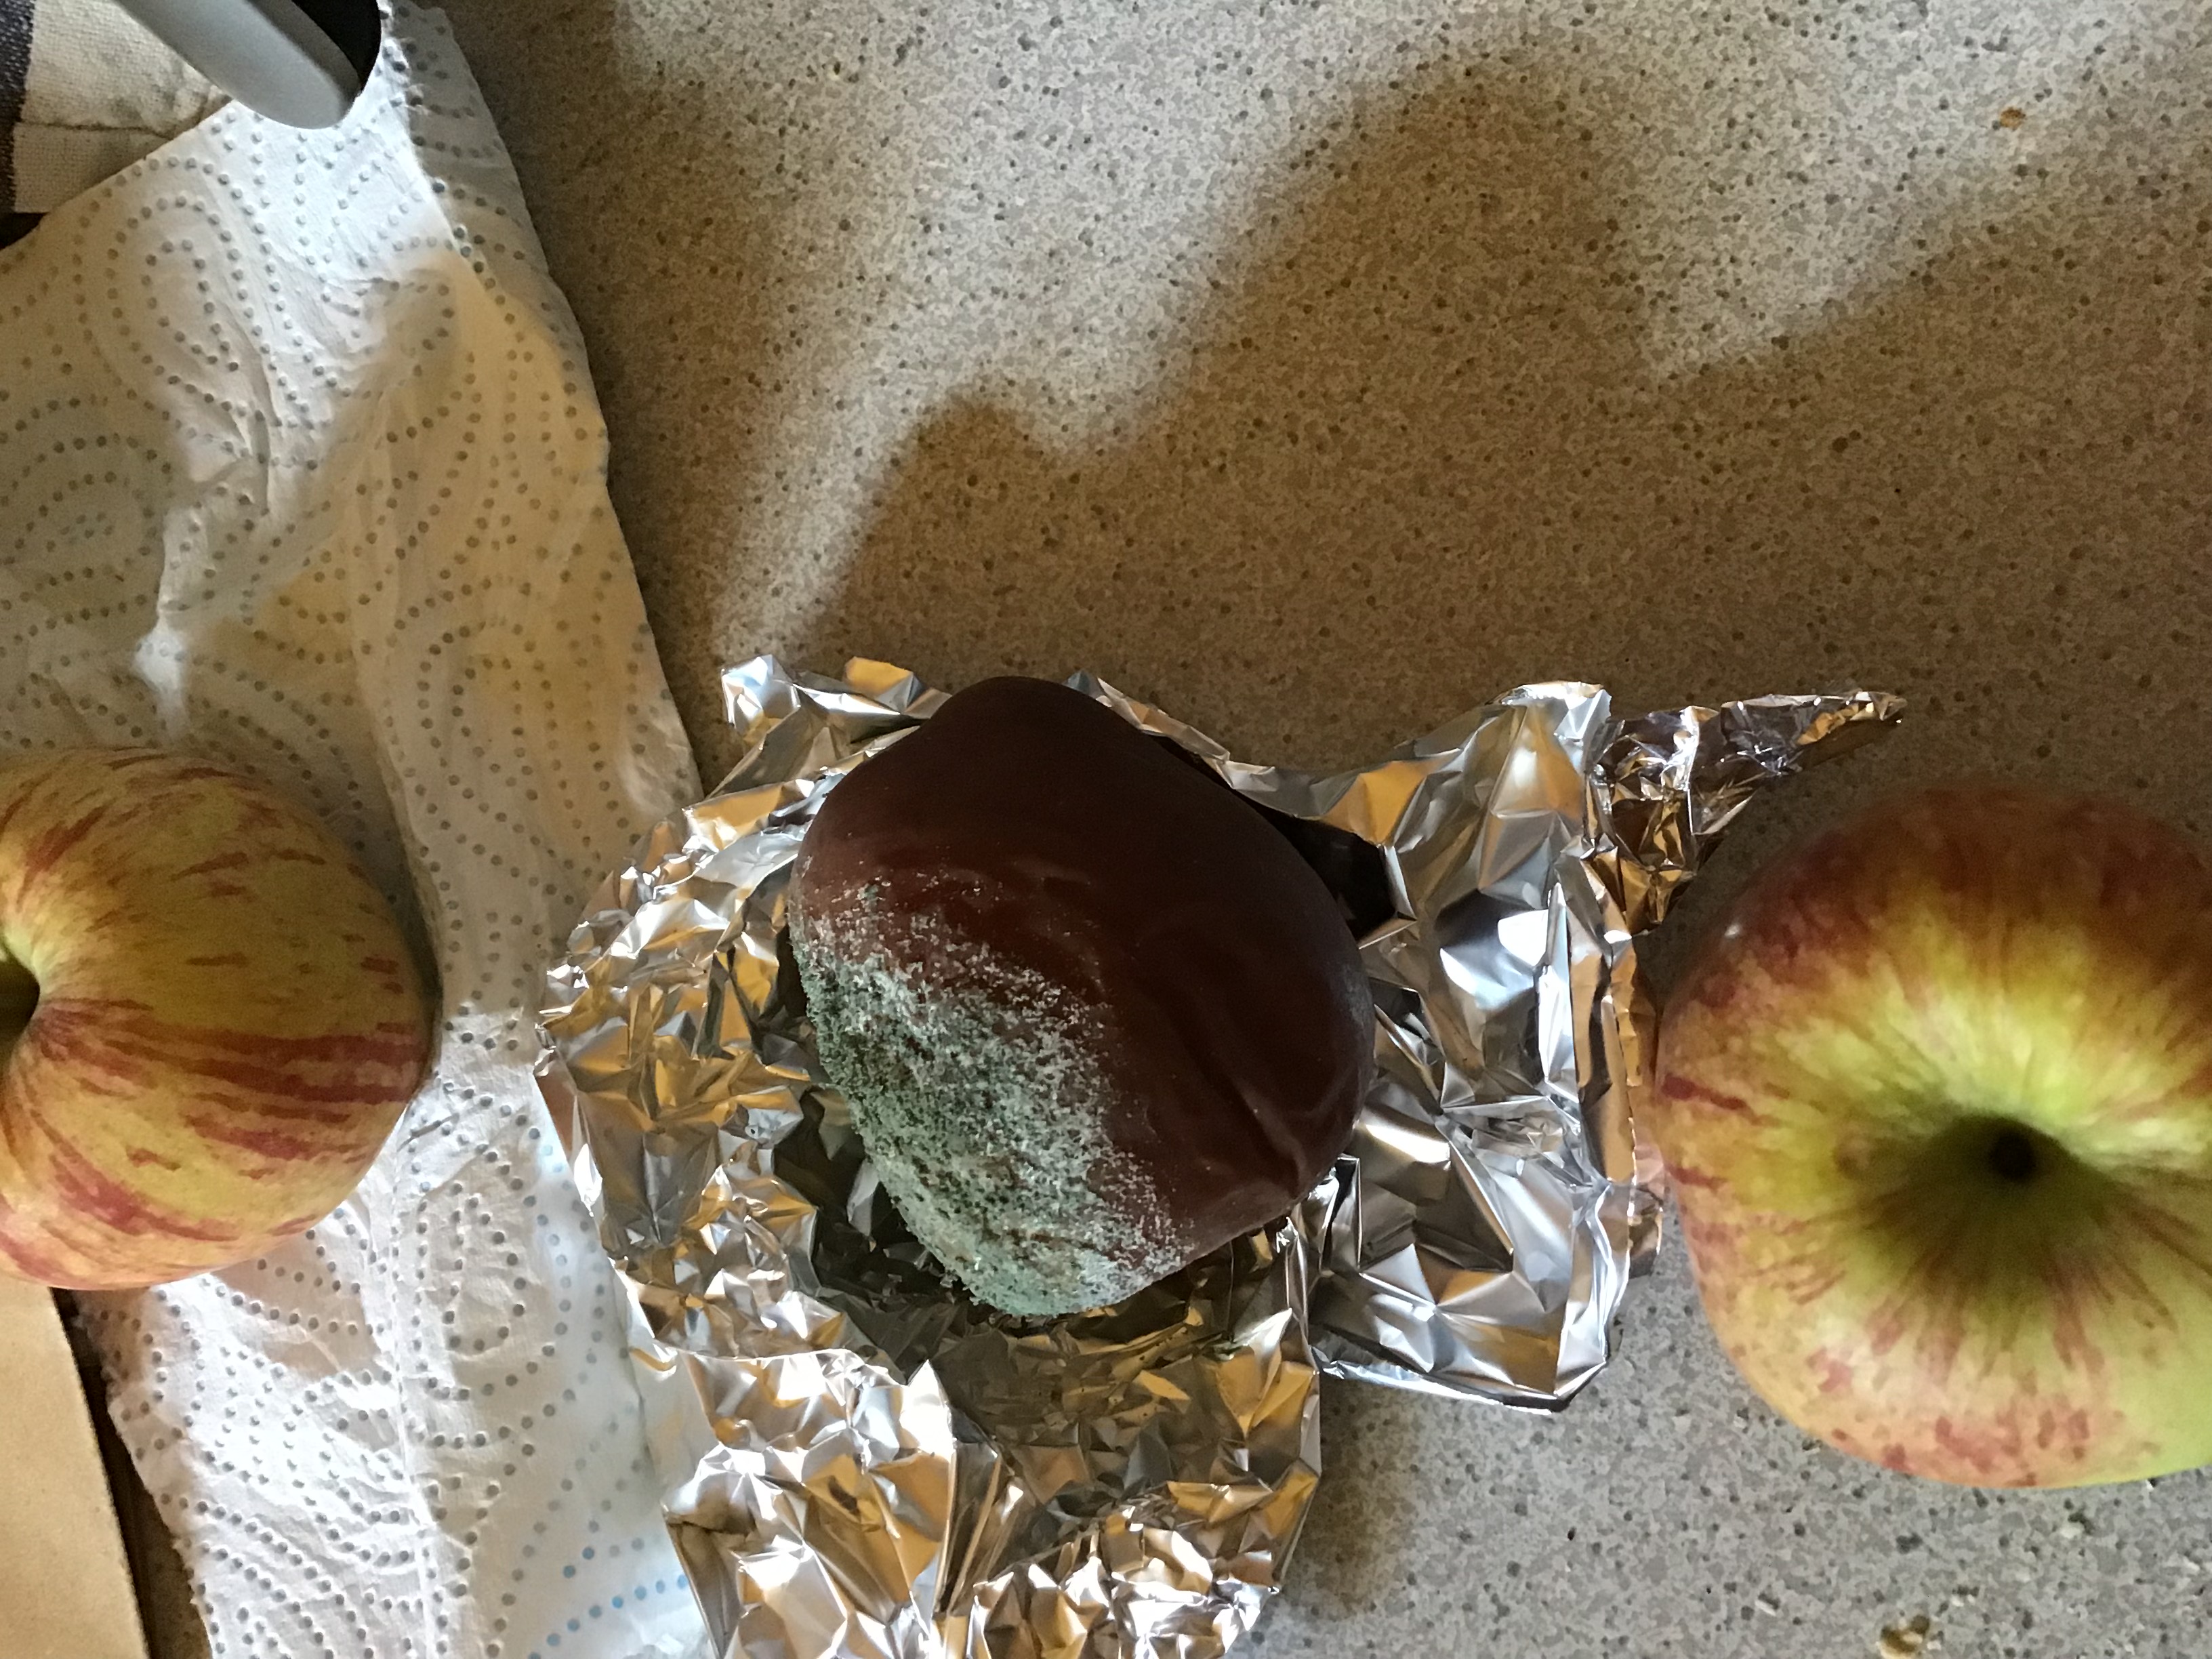 a decayed apple with mold sitting an a piece of aluminium foil